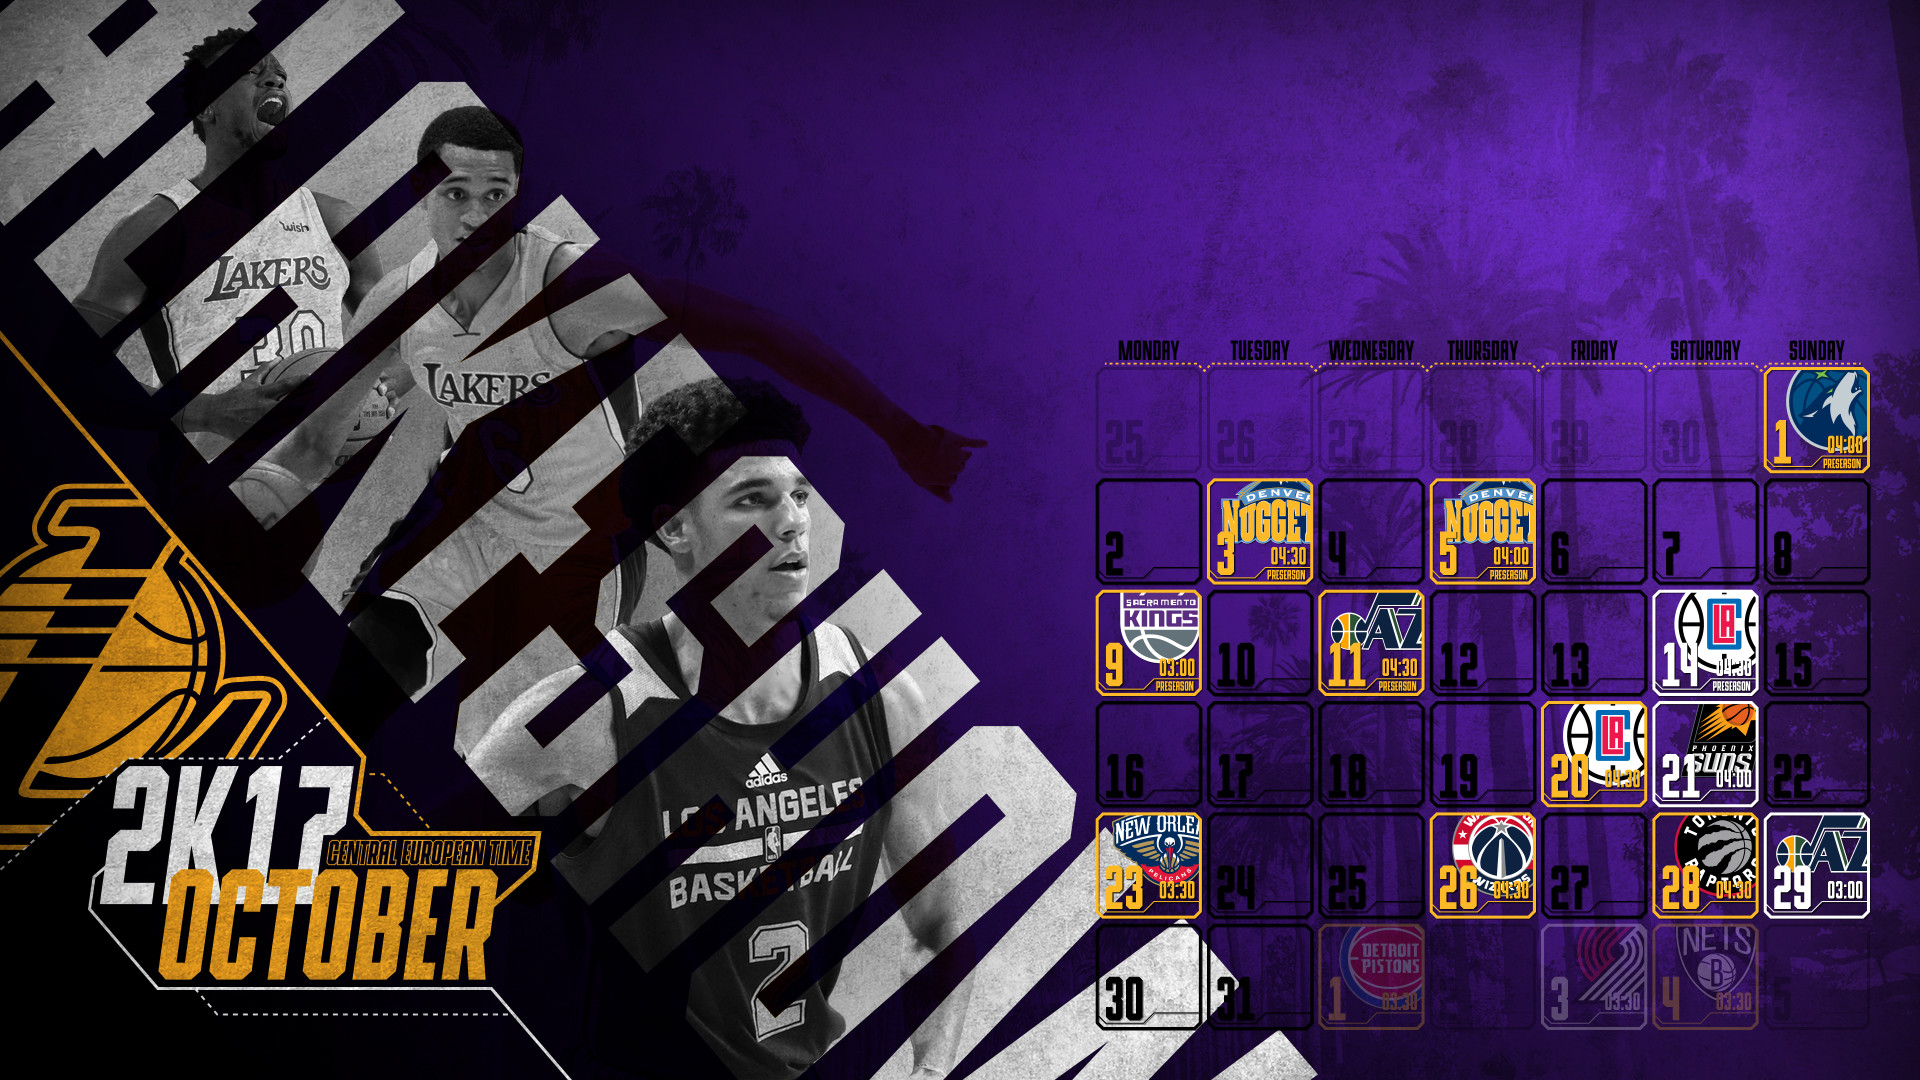 1920x1080 Schedule Wallpaper for the Los Angeles Lakers Regular Season 2017. Game  times are CET.